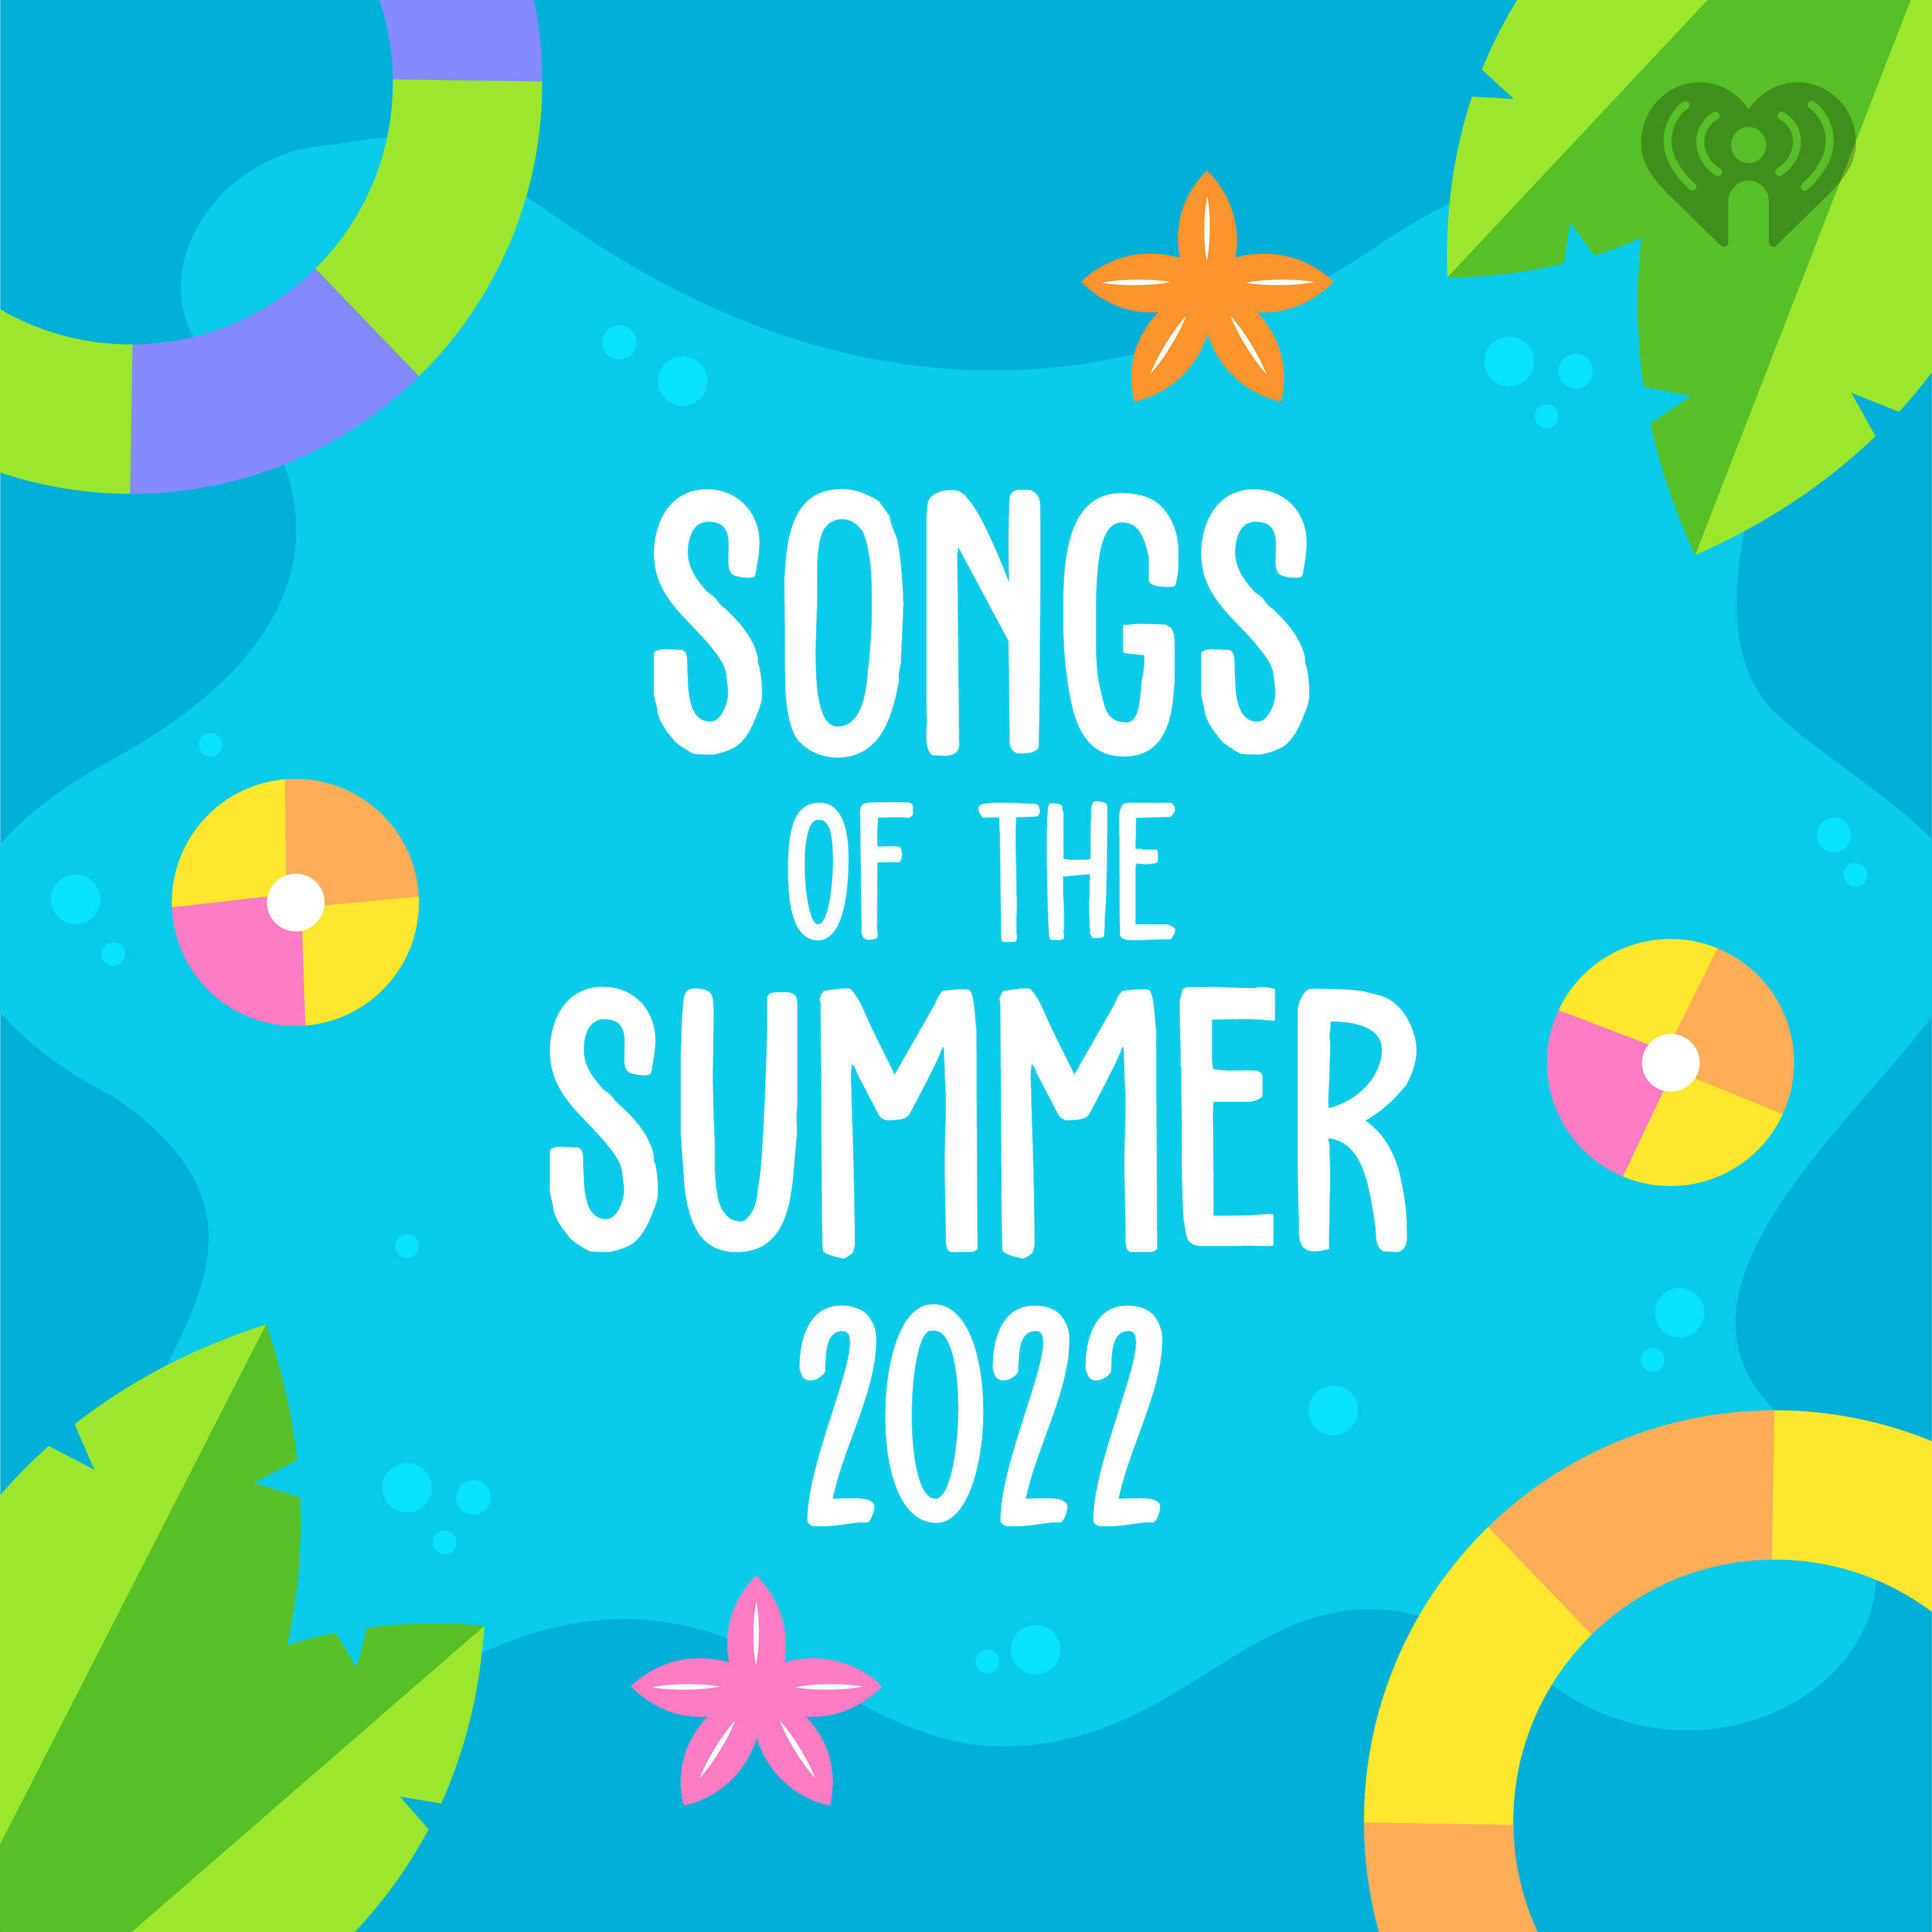 Songs of the Summer: 2022 - Listen Now